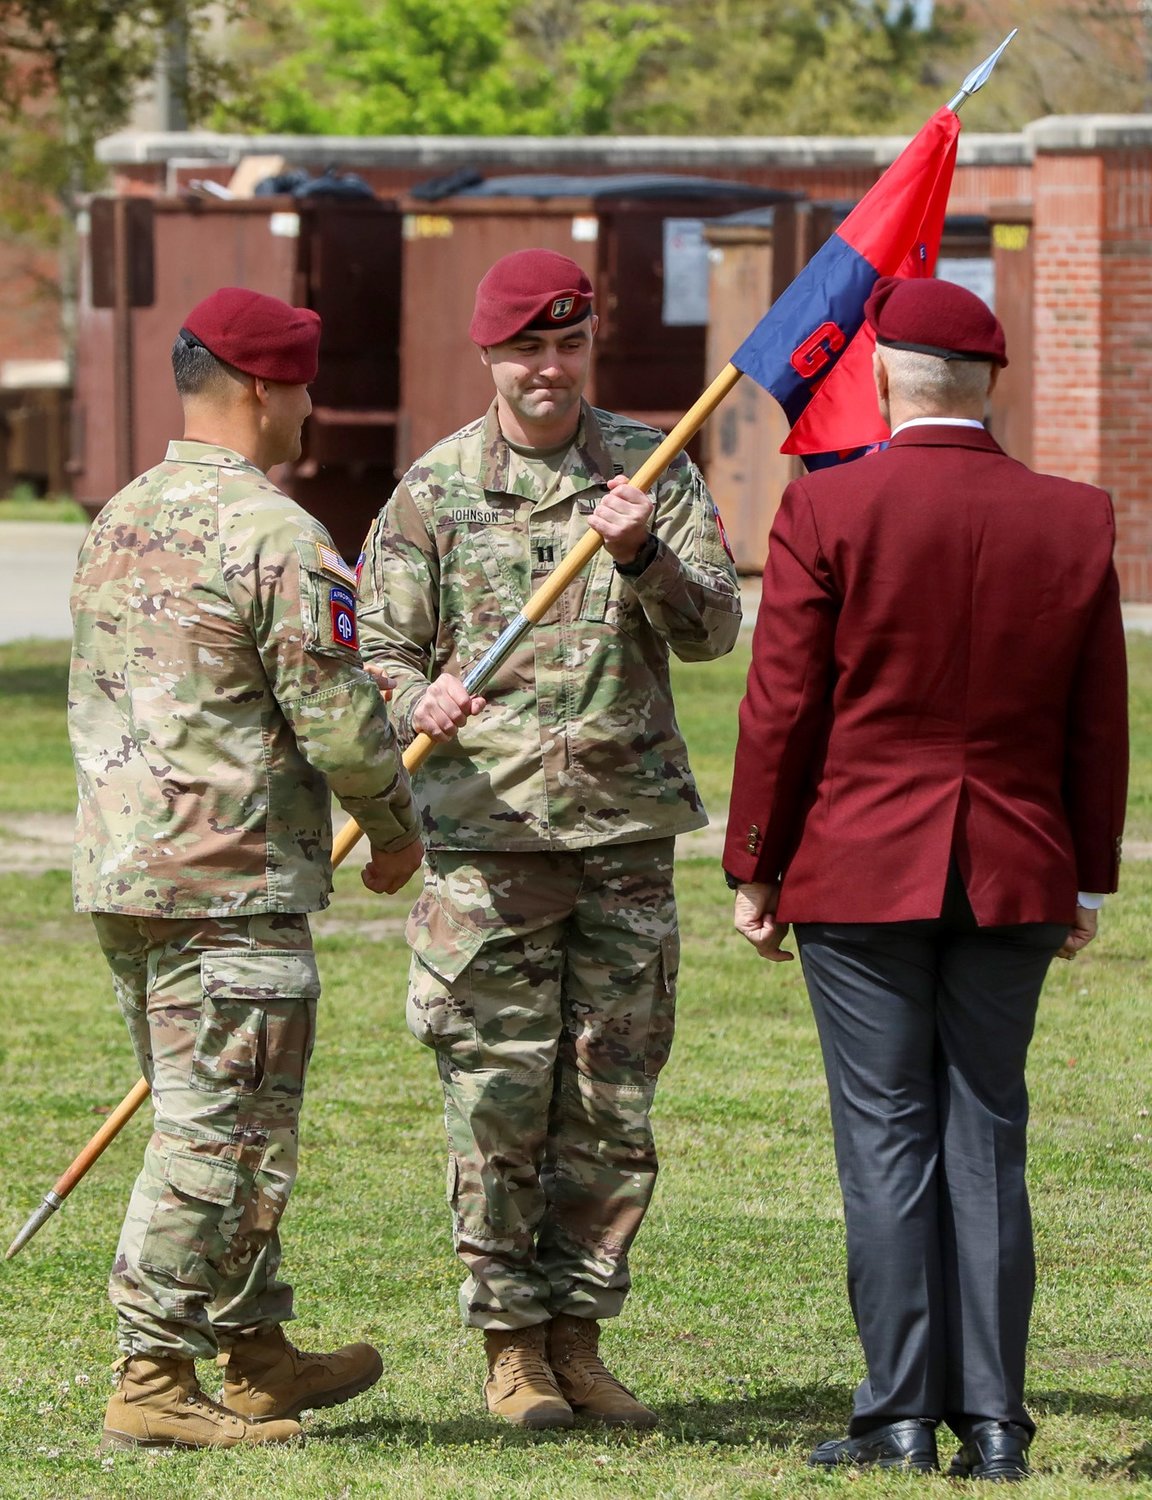 Lt. Col. Leif Thaxton, commander of Headquarters and Headquarters Battalion, 82nd Airborne Division, passes the guidon to Capt. Adam Johnson, commander of Gainey Company during the uncasing ceremony of Gainey Company on Fort Bragg on Wednesday.